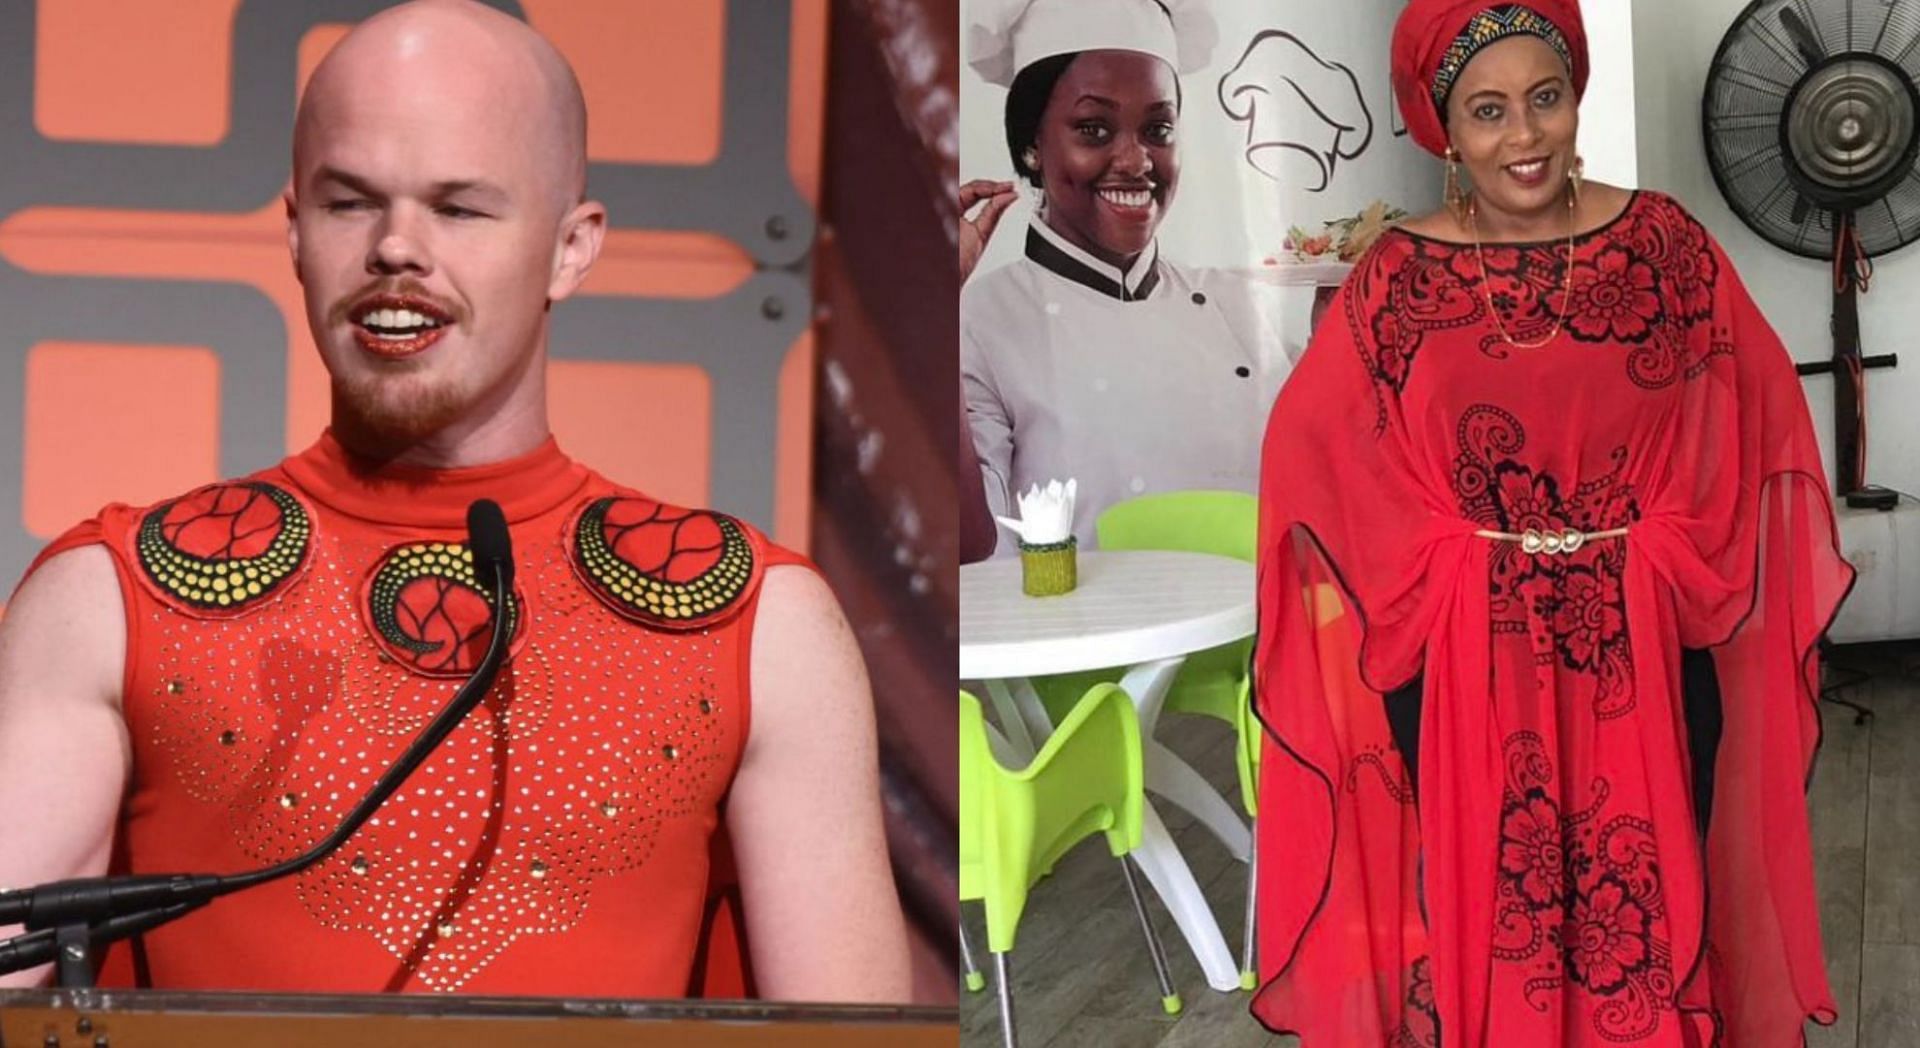 Tanzanian fashion designer Asya Khamsin has accused Sam Brinton of wearing her custom-made clothes that went missing in 2018 (Image via Getty Images and Asya Khamsin/Instagram)